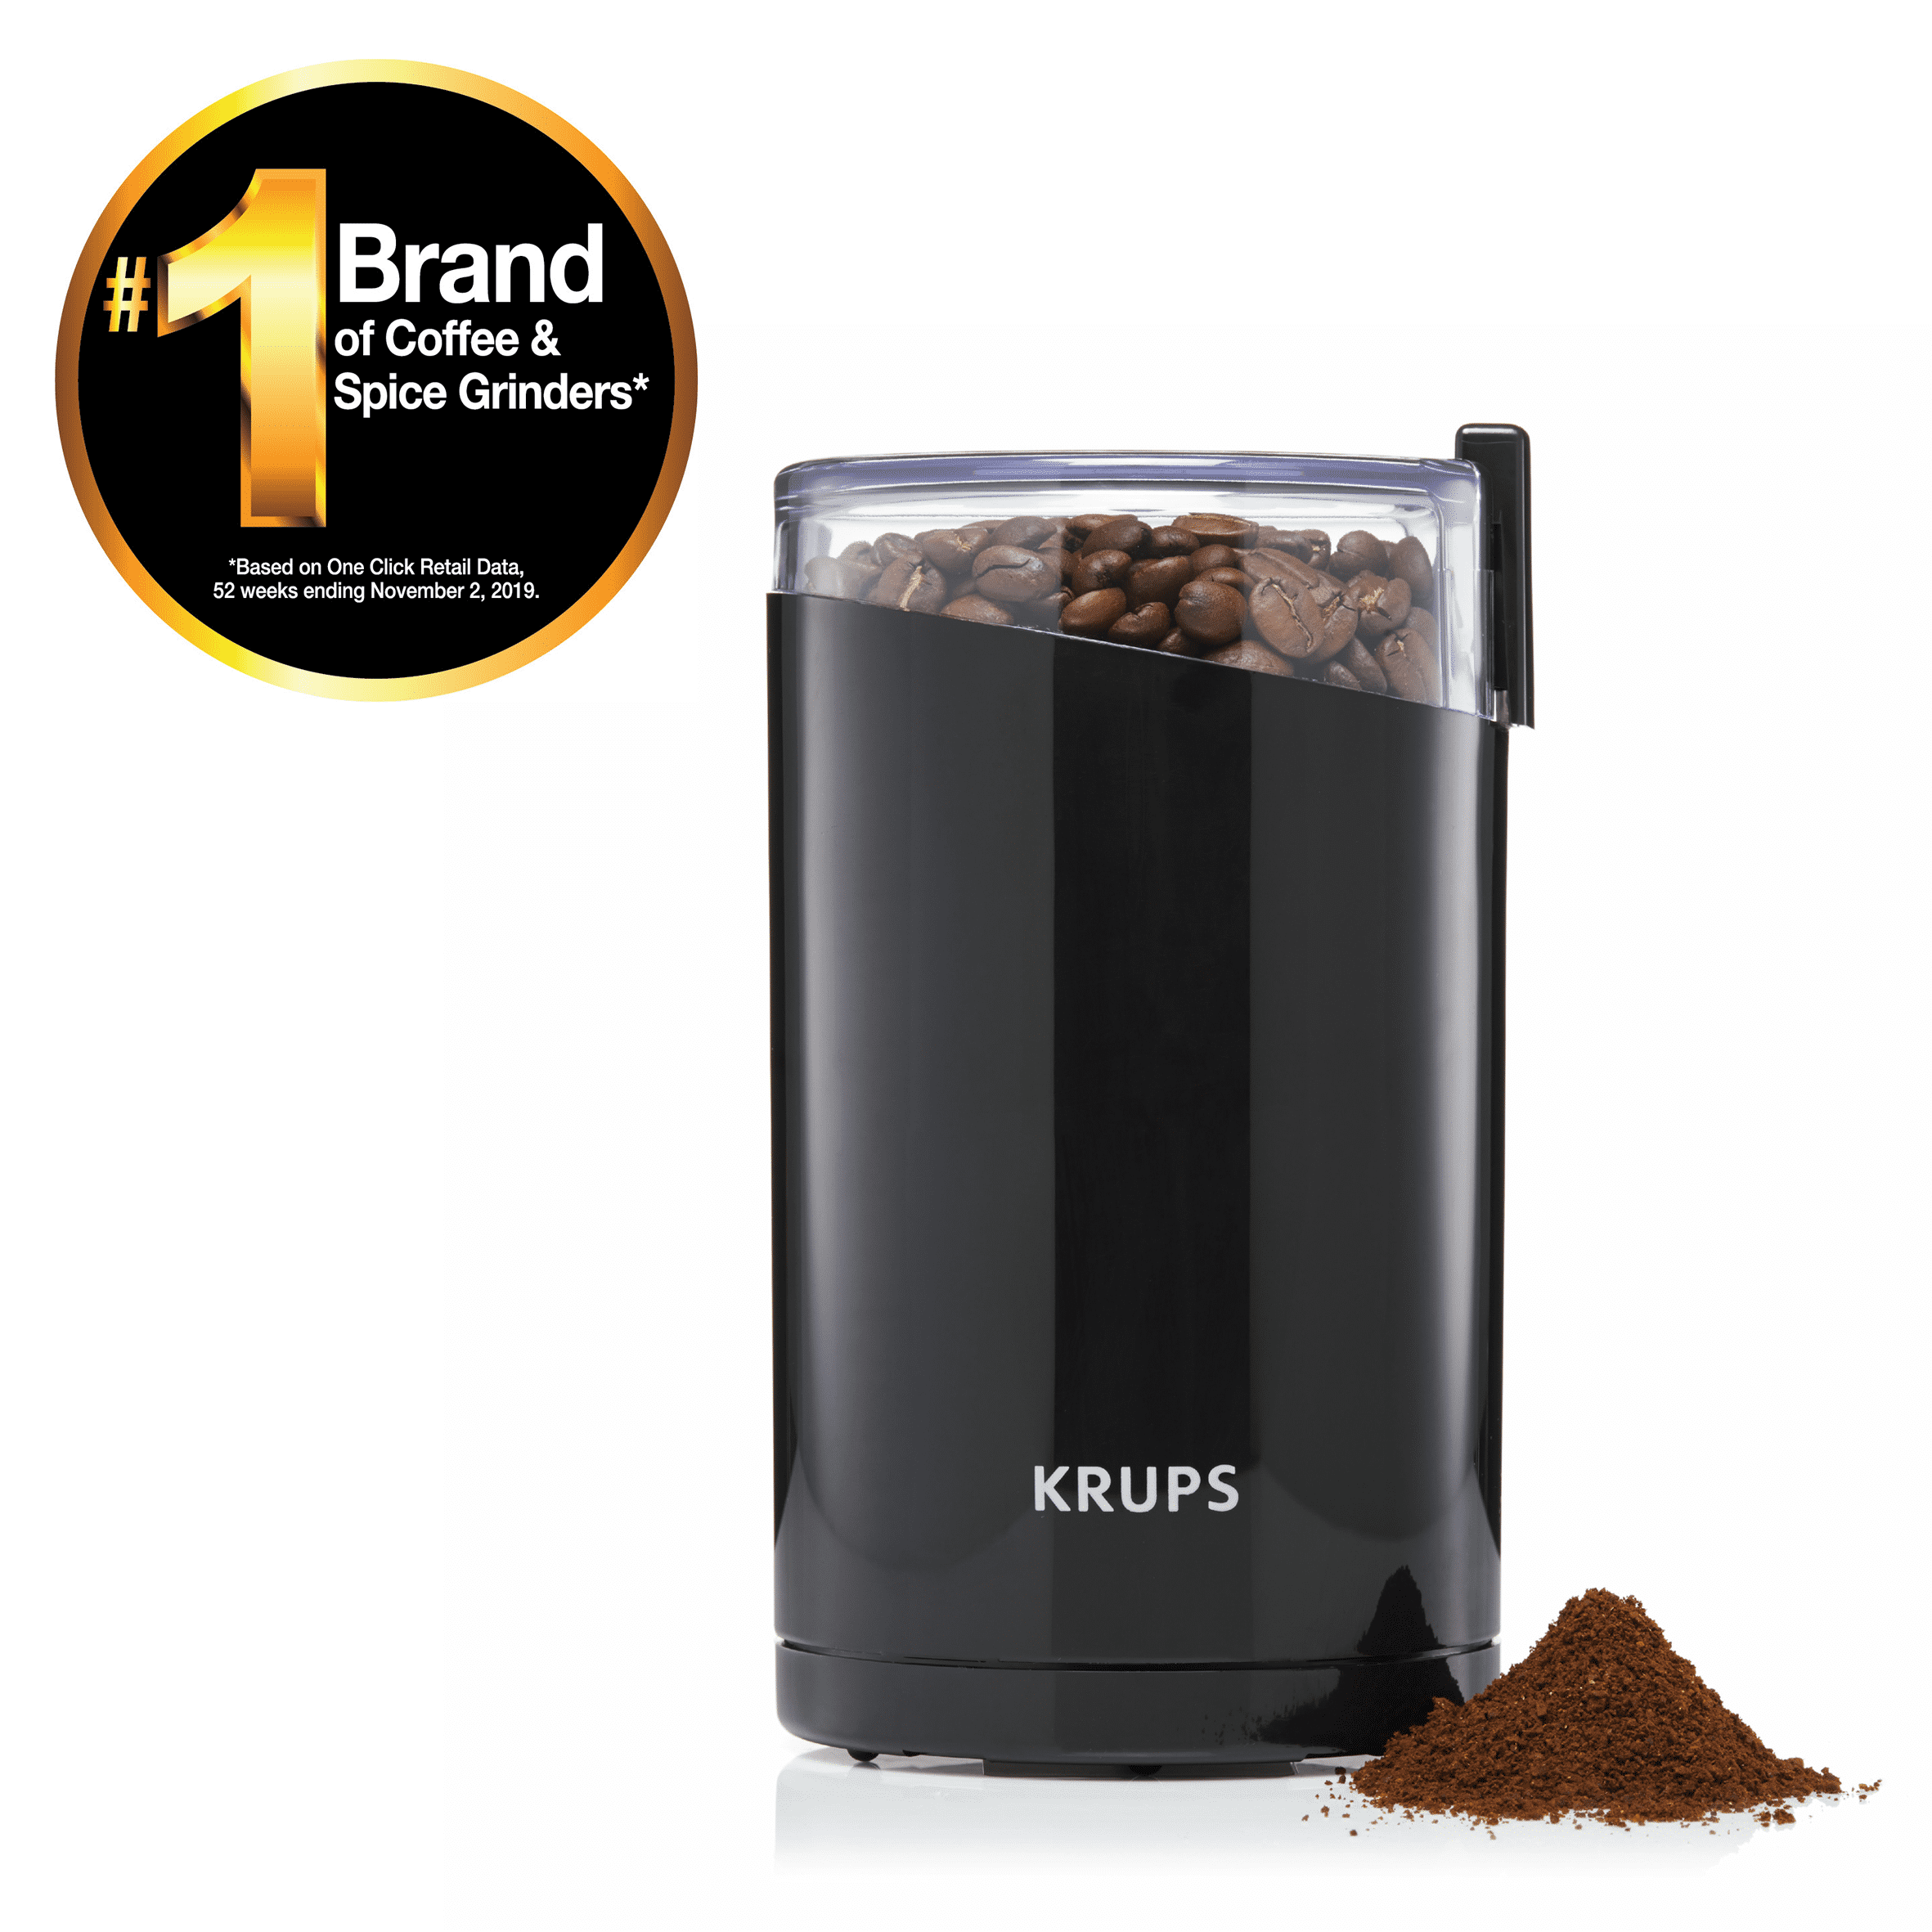 12 Krups GX332850 Silent Vortex Electric Grinder for Spice,Dry Herbs and Coffee 